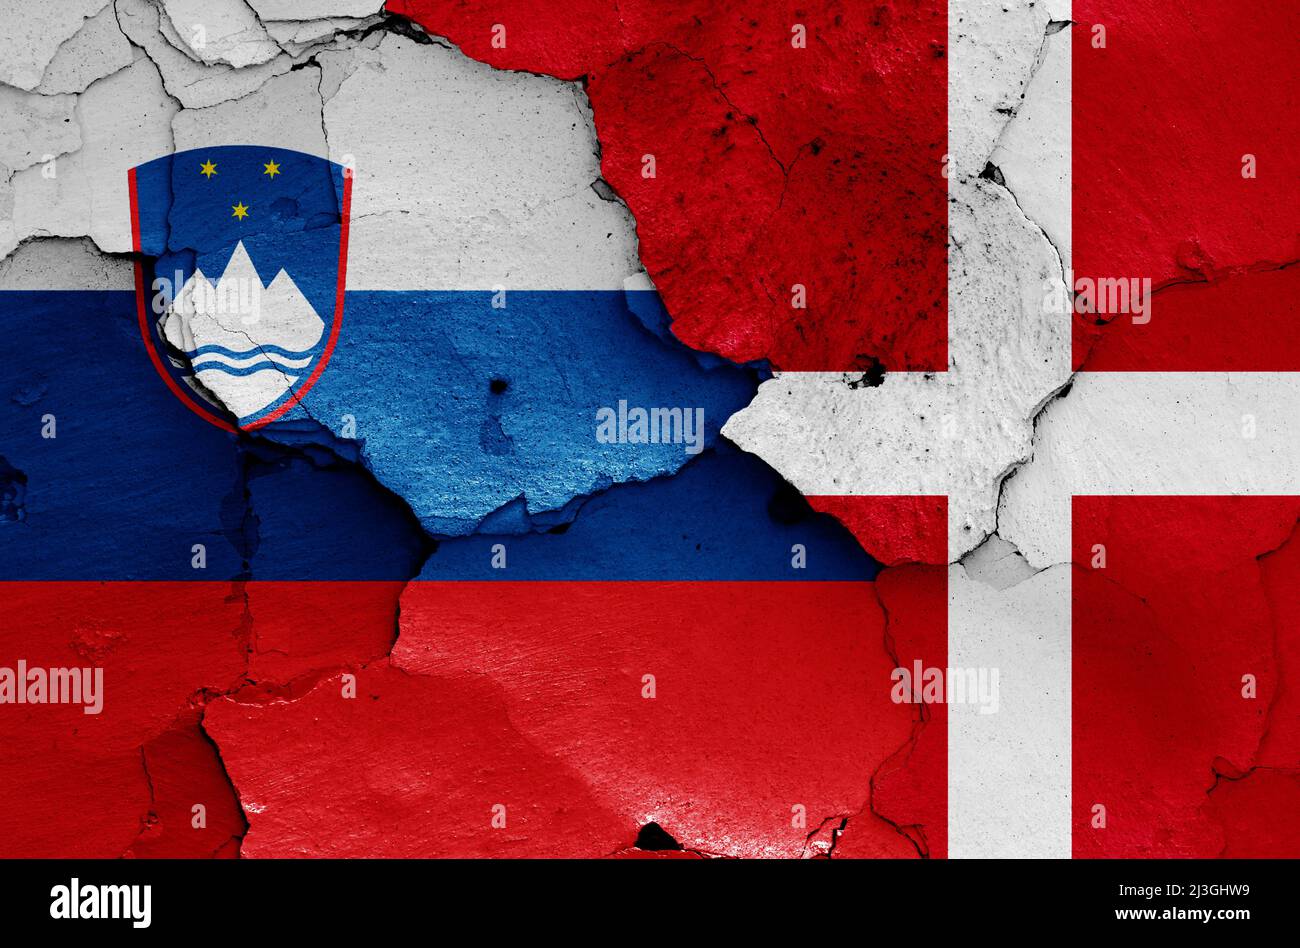 flags of Slovenia and Denmark painted on cracked wall Stock Photo